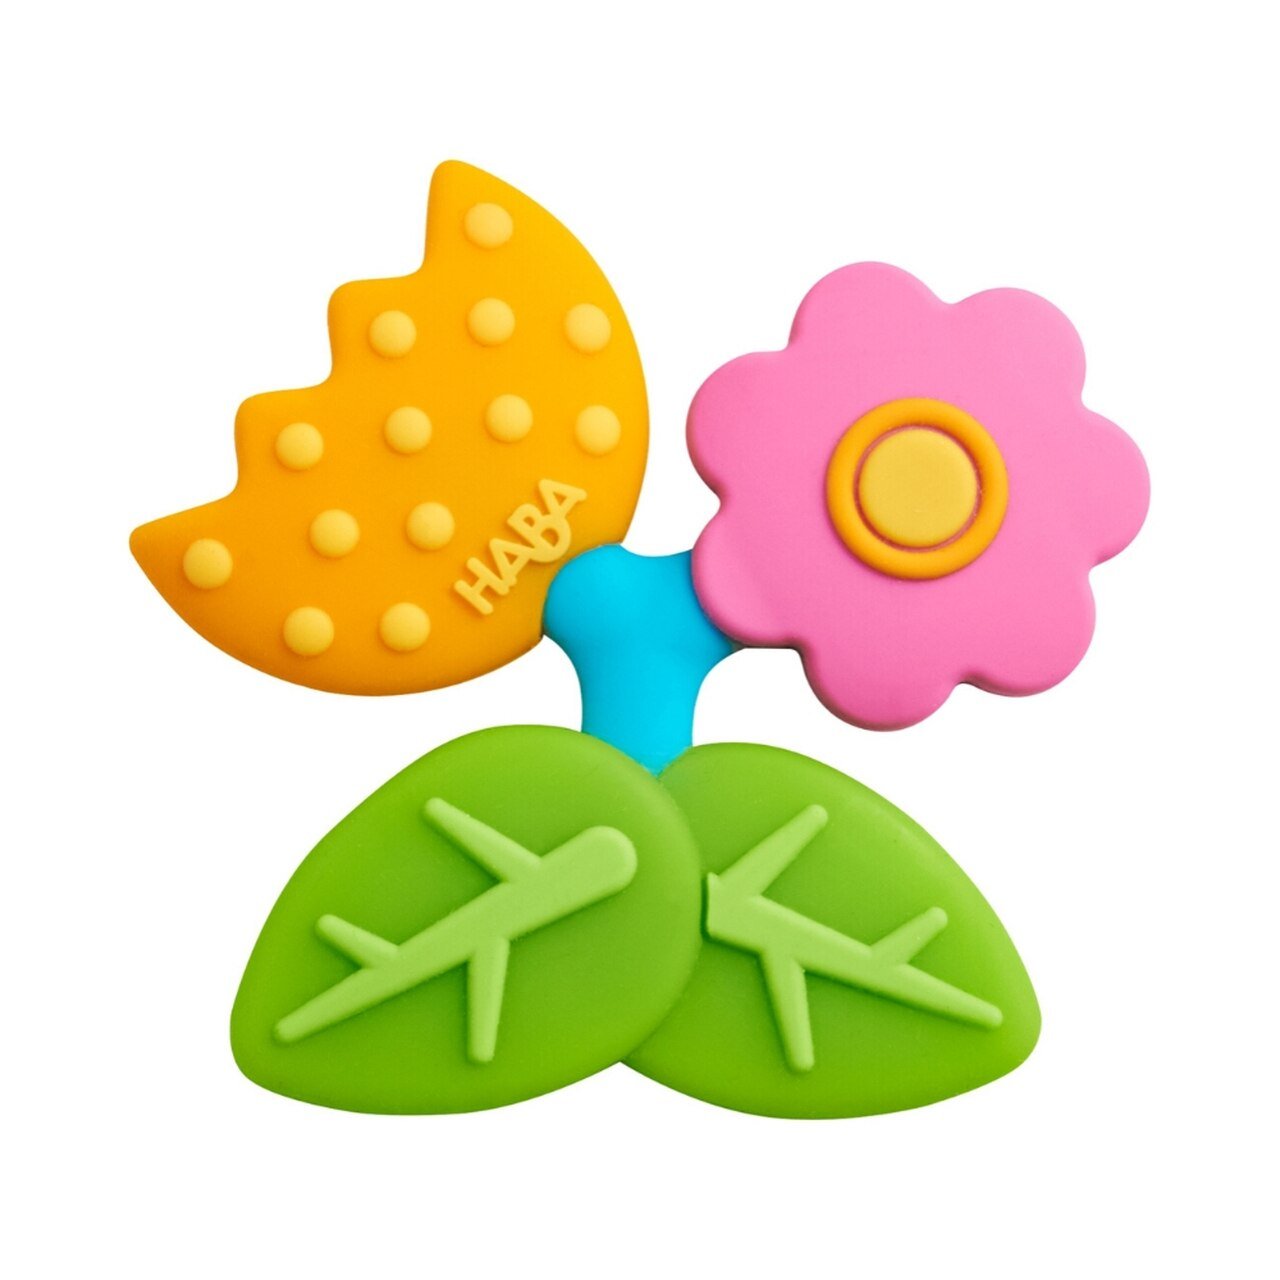 HABA Clutching Toy Petal Silicone Teether - Wood Wood Toys Canada's Favourite Montessori Toy Store